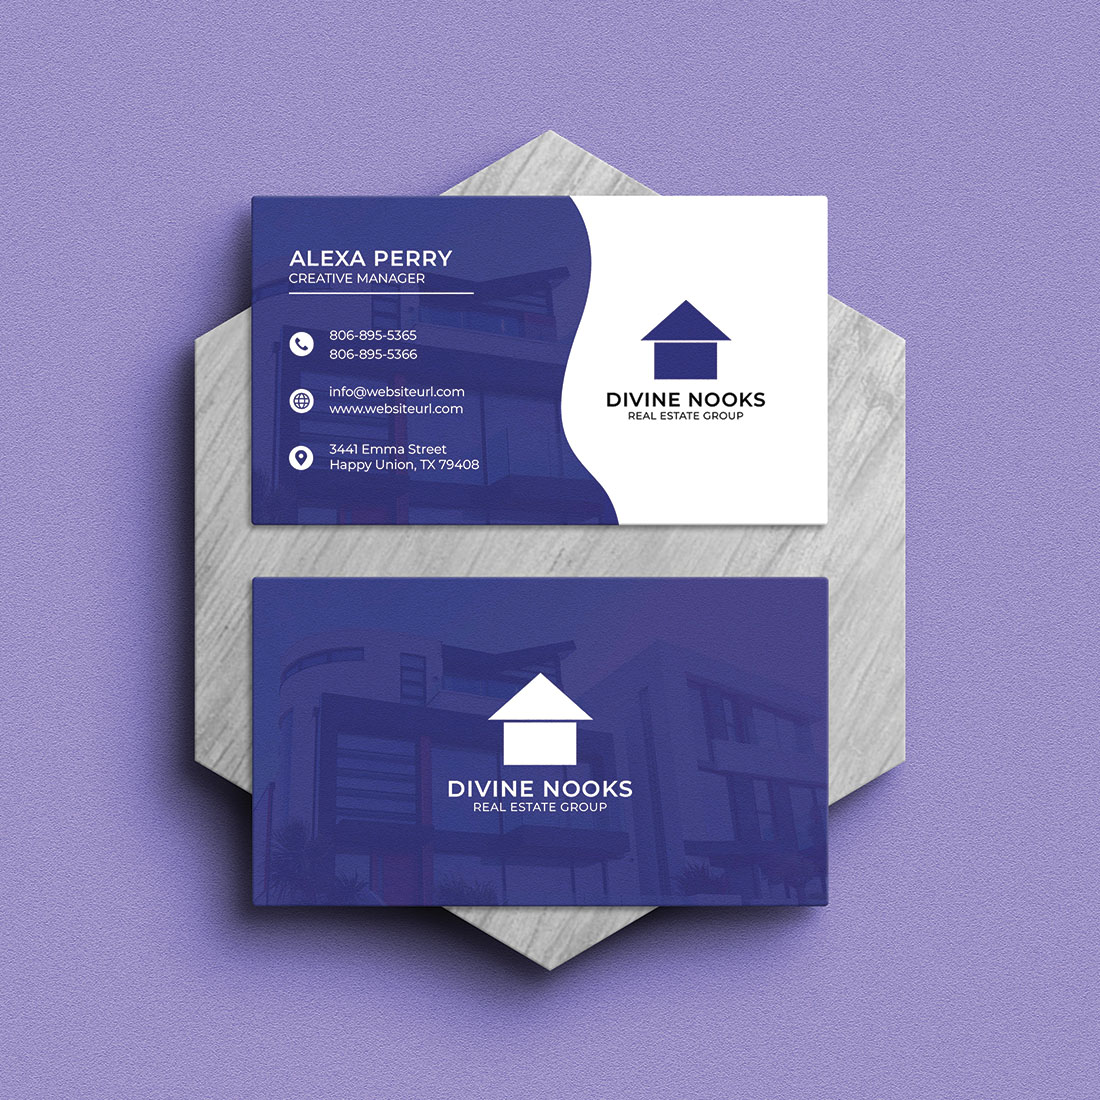 Image of a colorful business card template in blue and white.